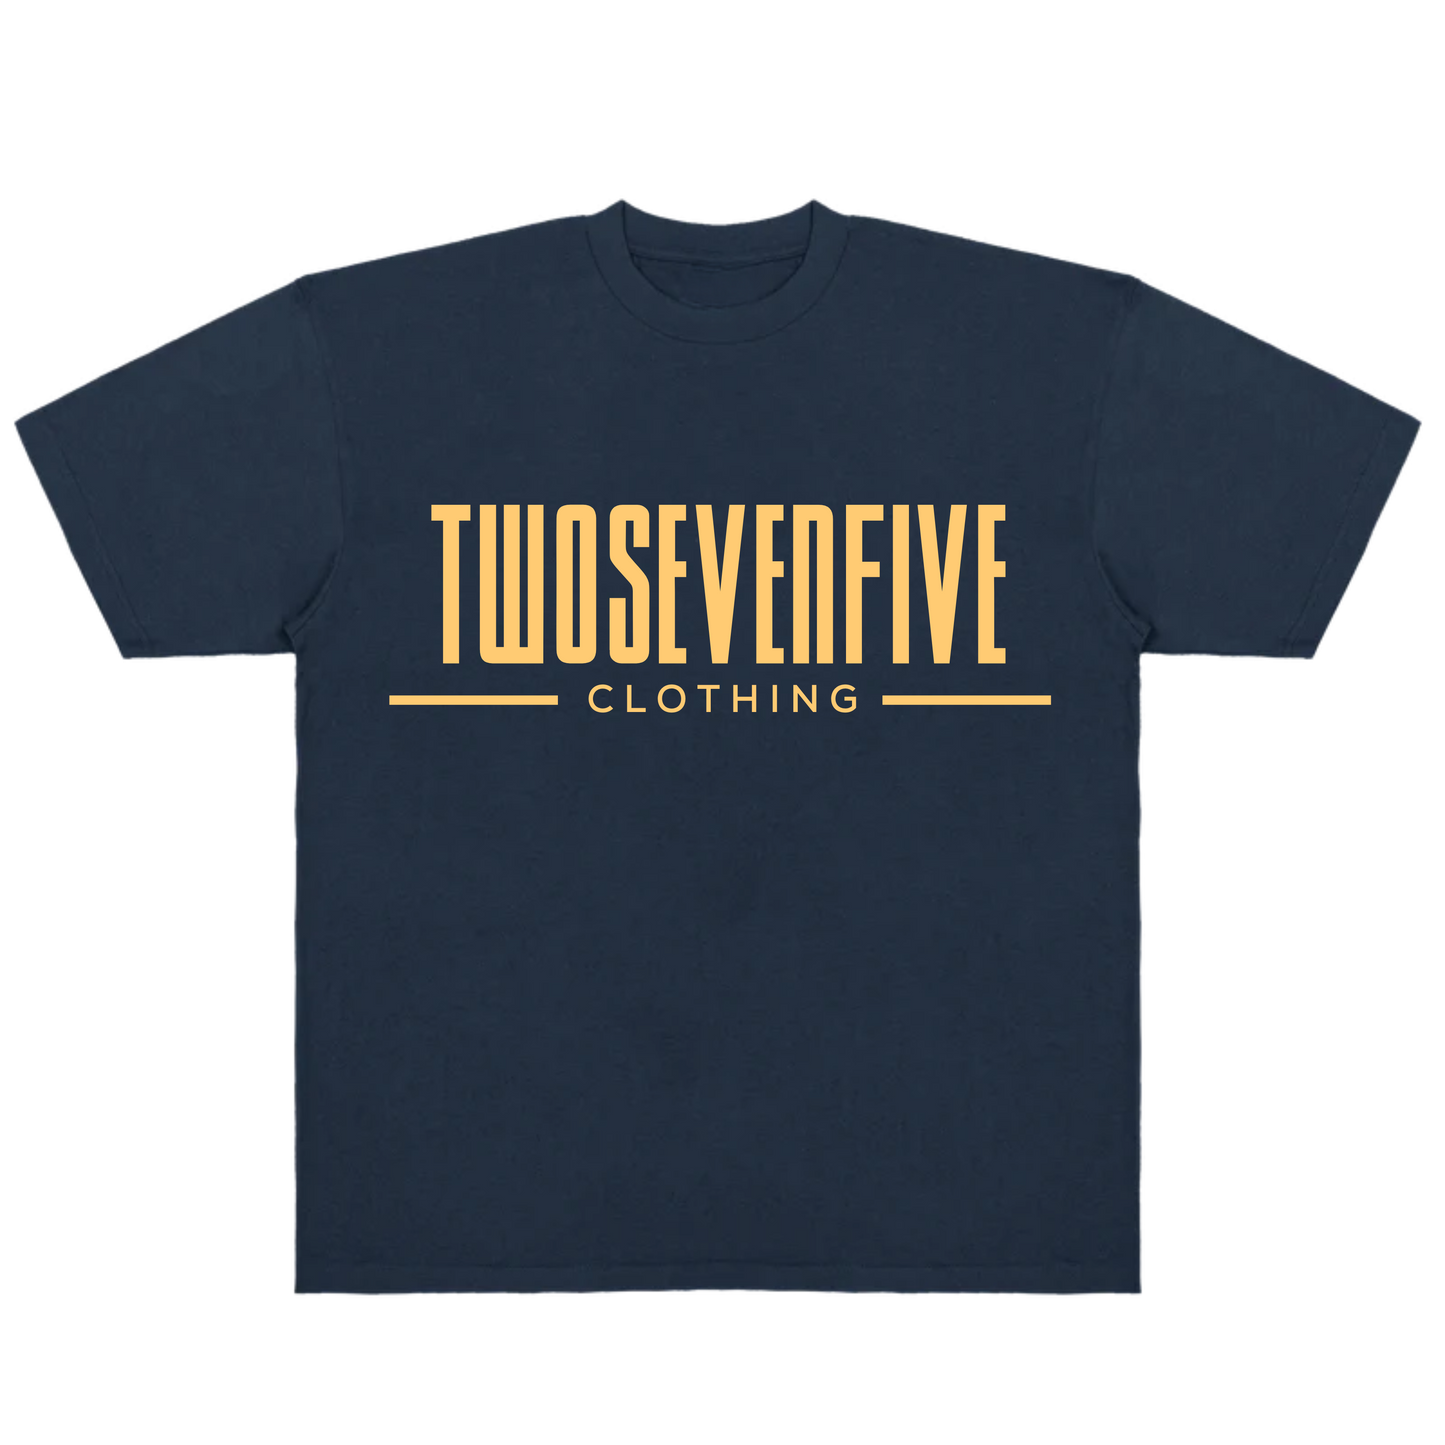 NEW!! Heavy Hitterz - Navy Twosevenfive. Clothing T-Shirt